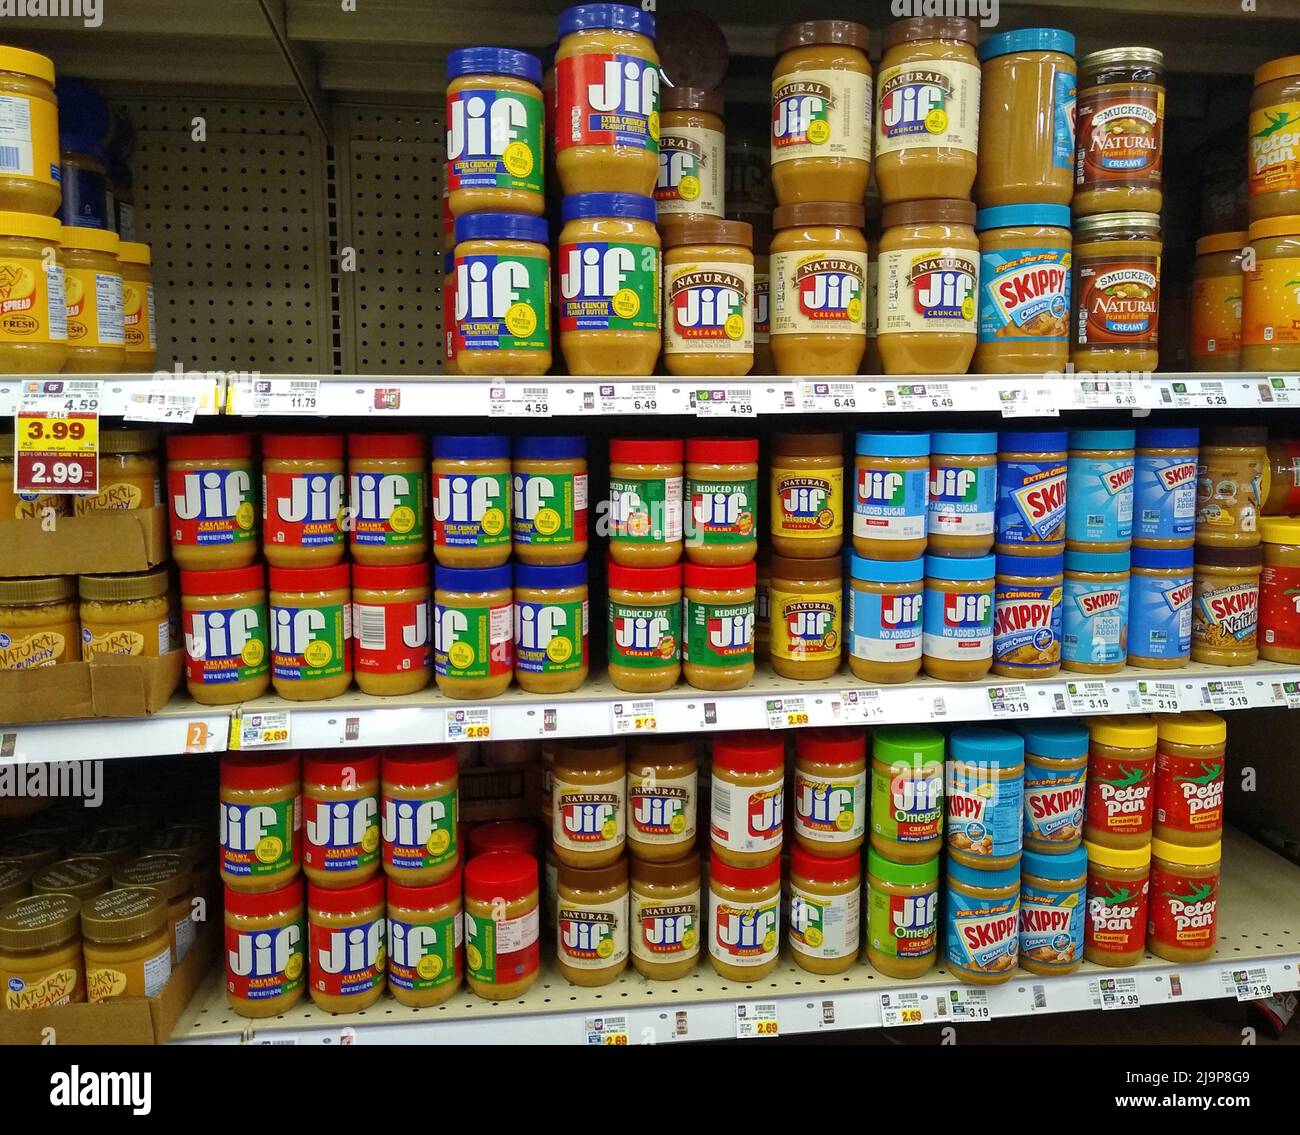 Jar of Jif peanut butter occupy three shelves alongside other peanut butter and peanut spread offerings from Kroger, Smucker's, Skippy and Peter Pan brands on Sunday, May 22, 2022 at Kroger #770 in Owensboro, Daviess County, KY, USA. The J.M. Smucker Co. issued a voluntary recall for select Jif peanut butter products due to potential Salmonella contamination on May 20, 2022, and a Kroger assistant manager removed all Jif peanut butter products from this store's shelves on May 24, 2022. (Apex MediaWire Photo by Billy Suratt) Stock Photo